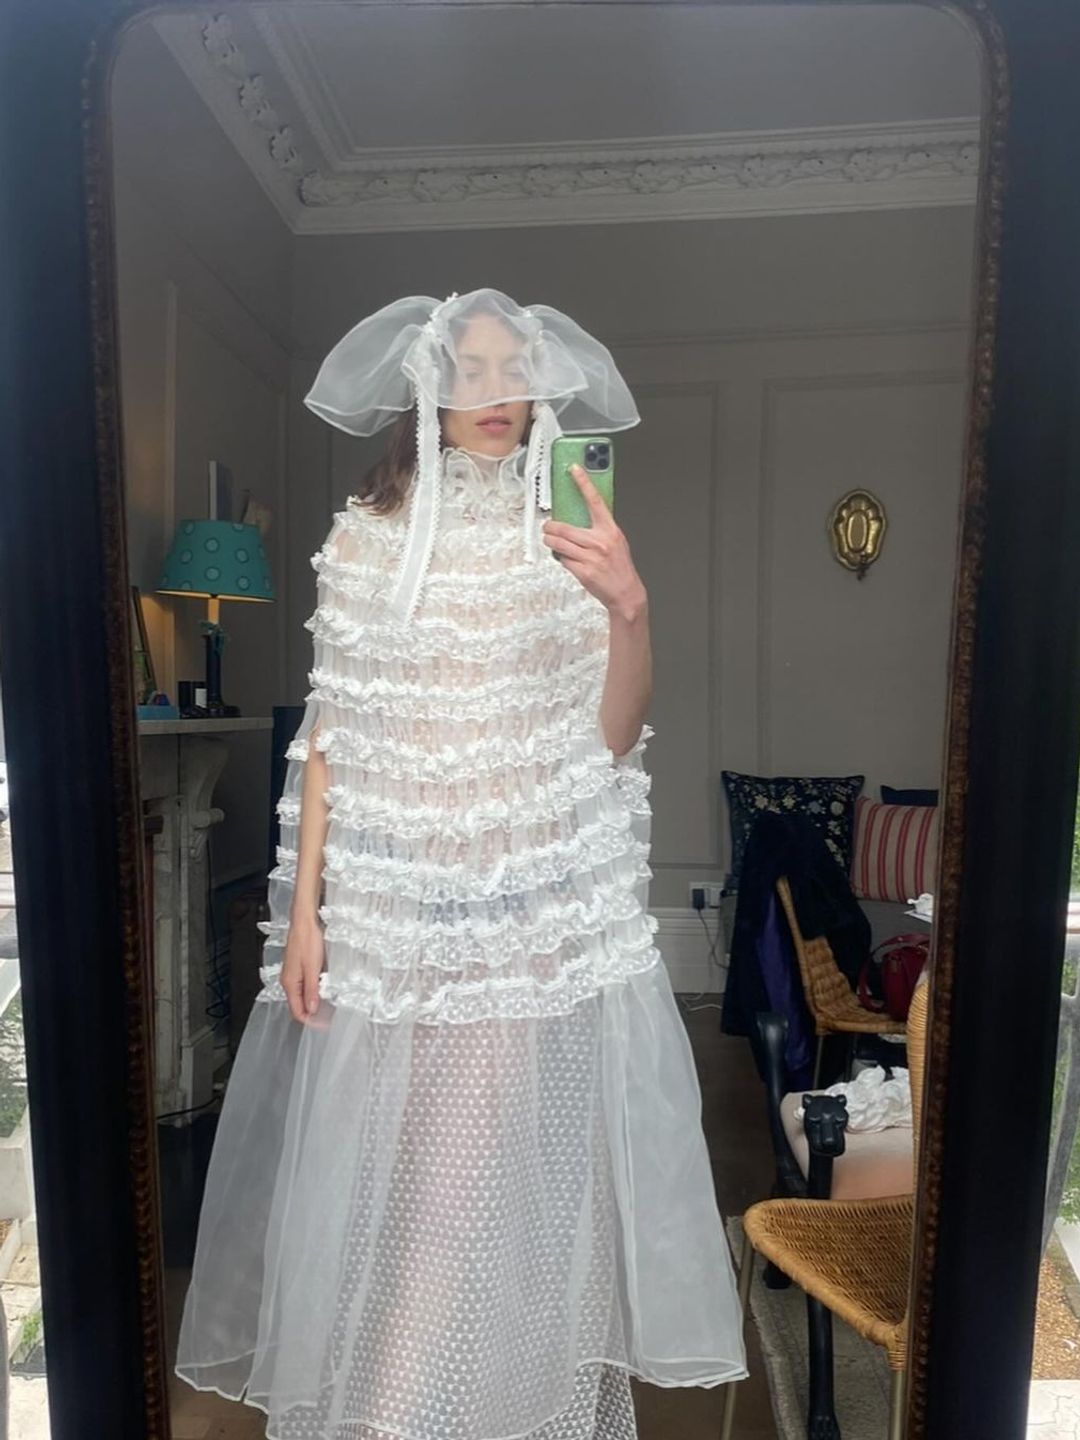 I hope she wears this to her wedding